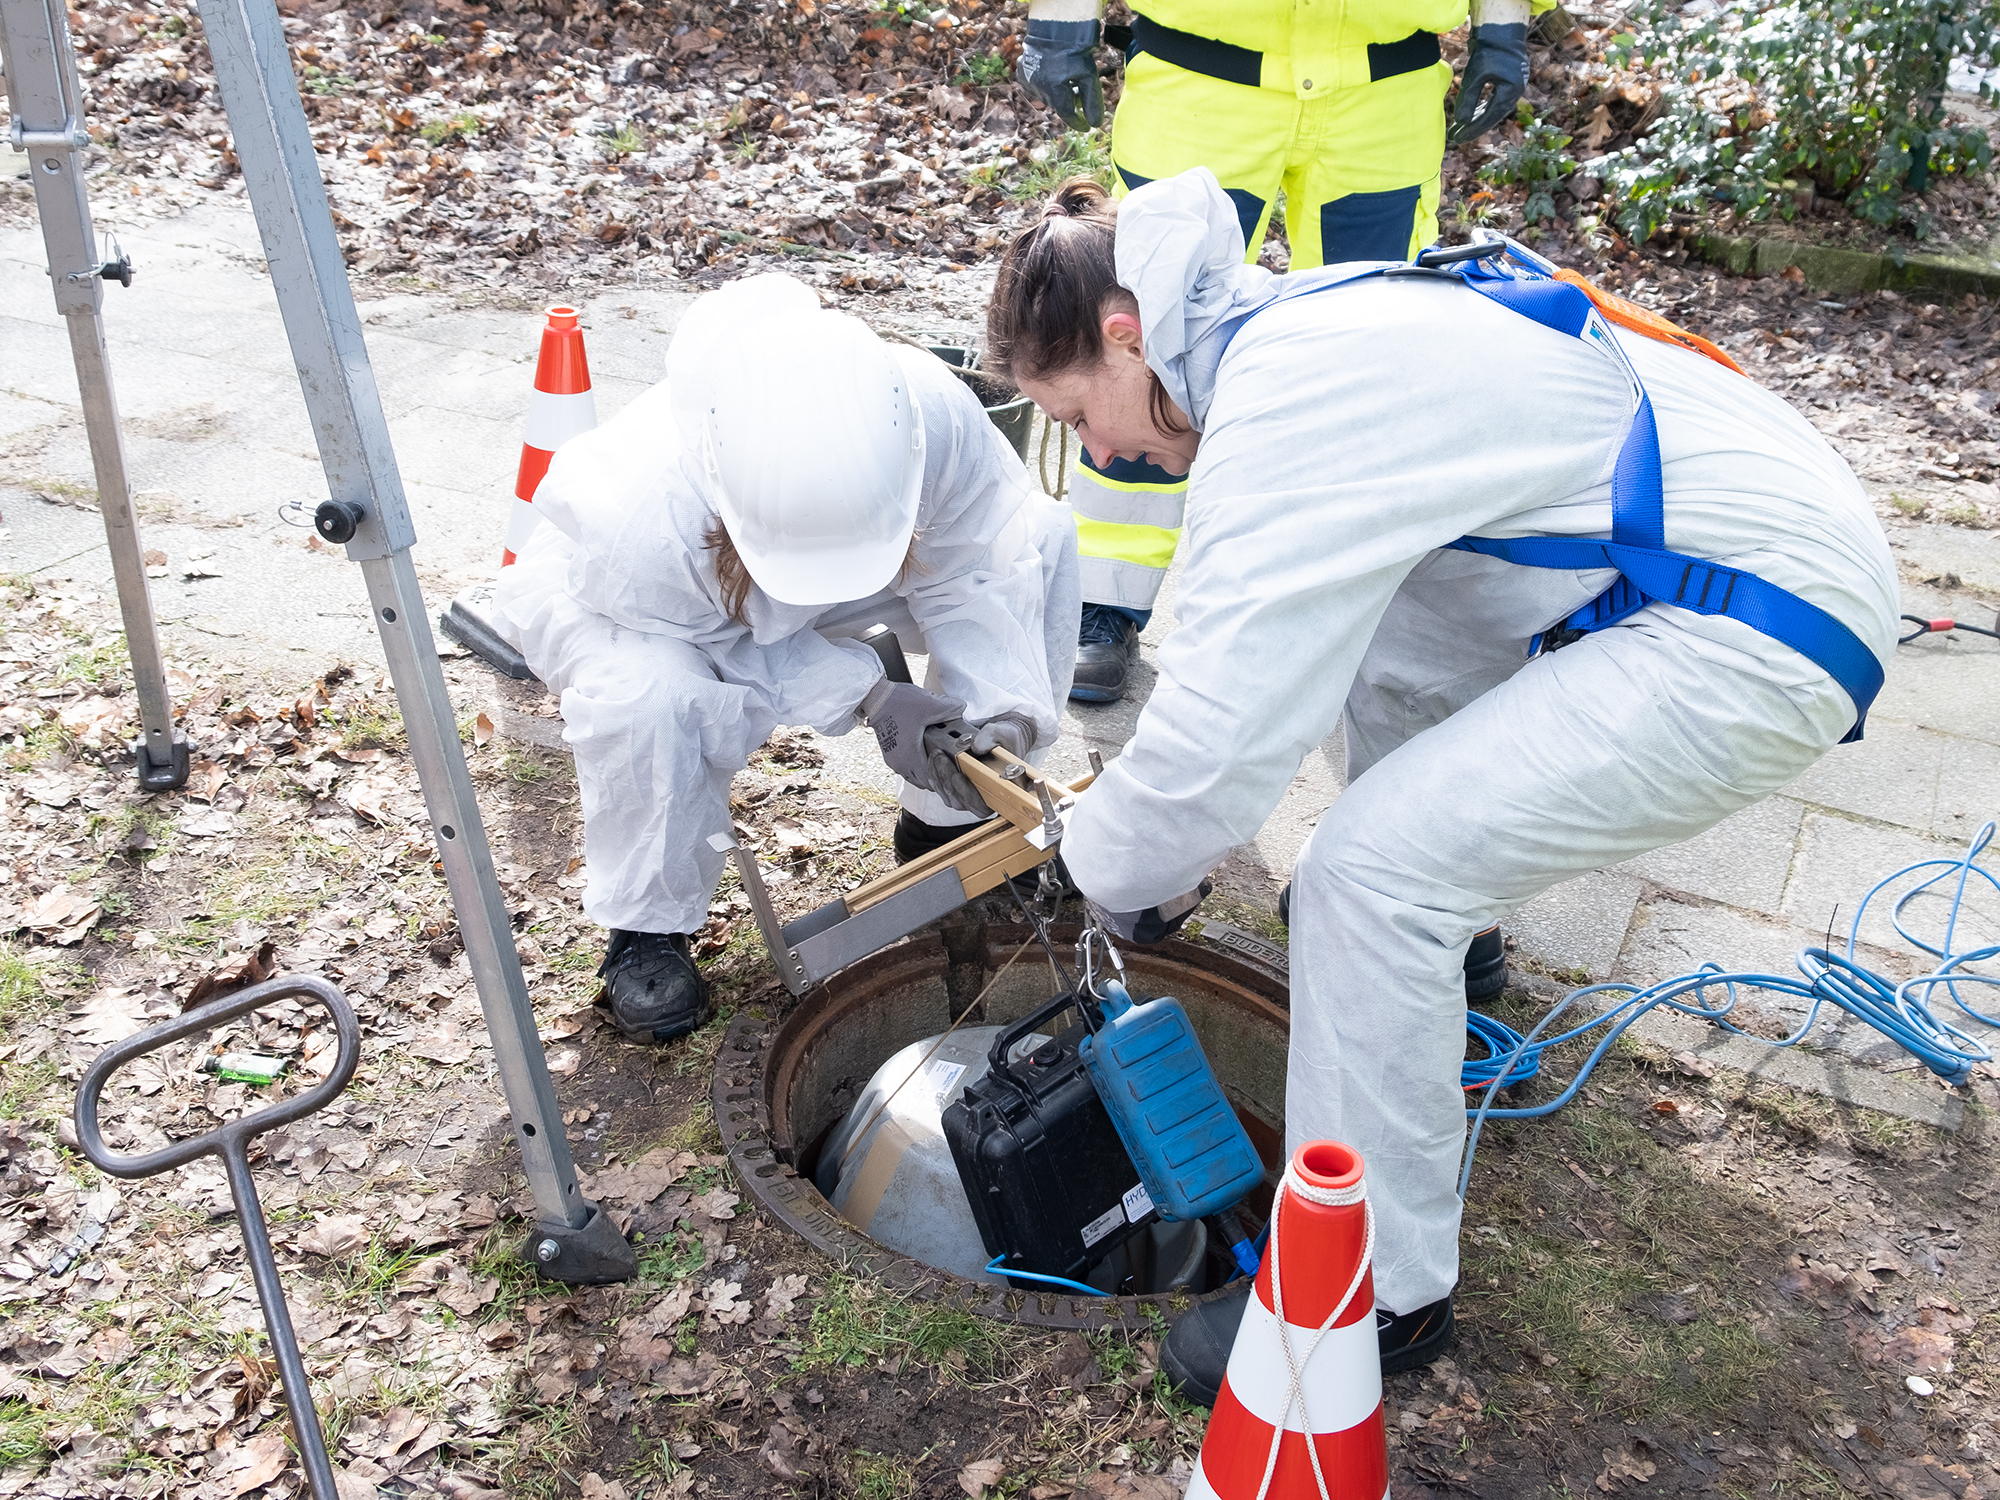 Scientists place the instruments in the manhole using a supporting cross